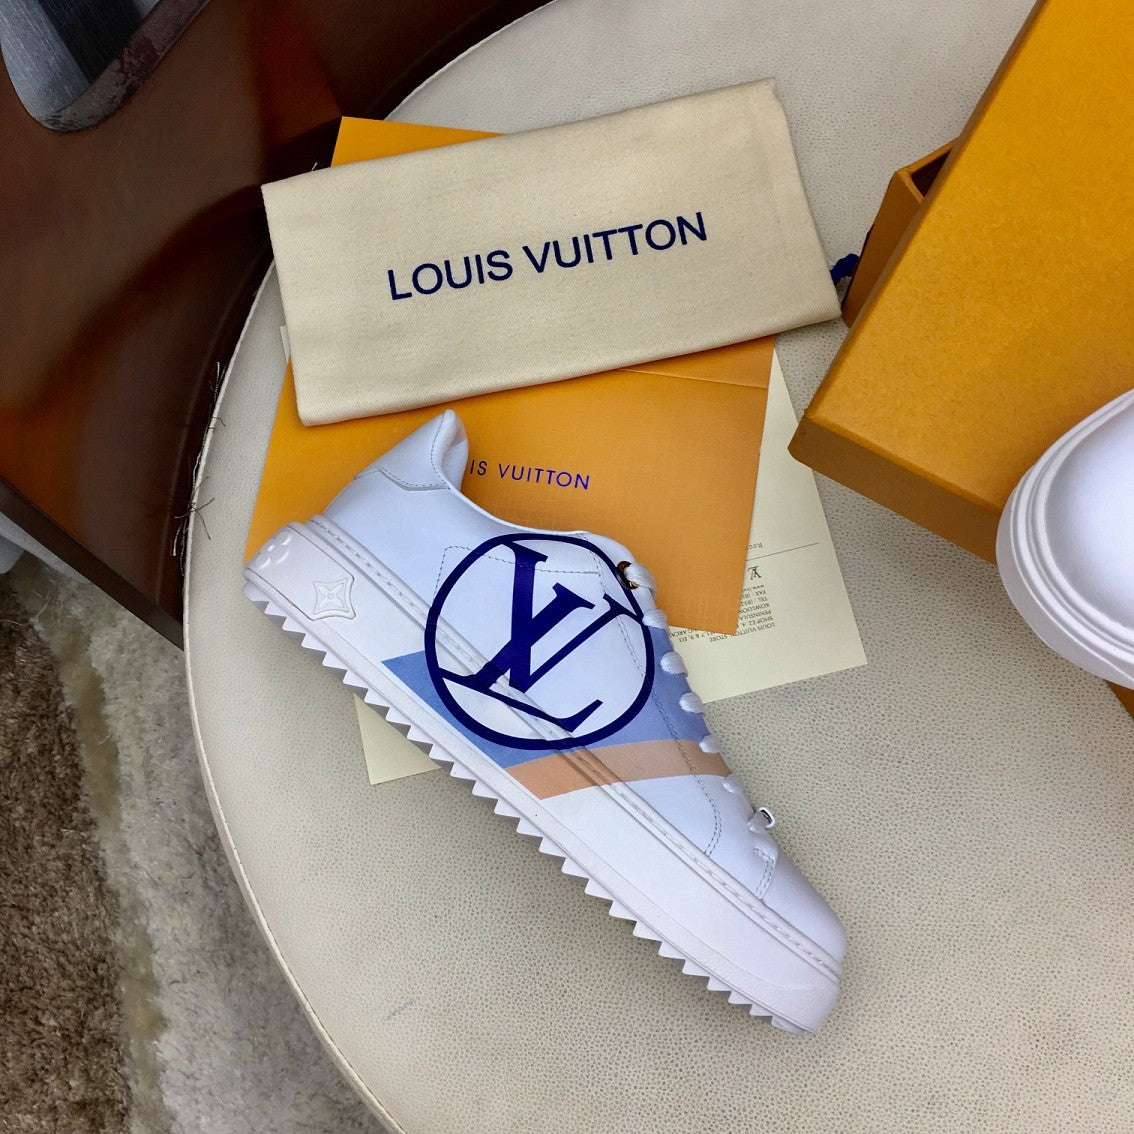 LOUIS VUITTON UNVEILS ITS NEW DIGITAL CAMPAIGN DEDICATED TO THE LV  ARCHLIGHT SNEAKER COLLECTION - Numéro Netherlands